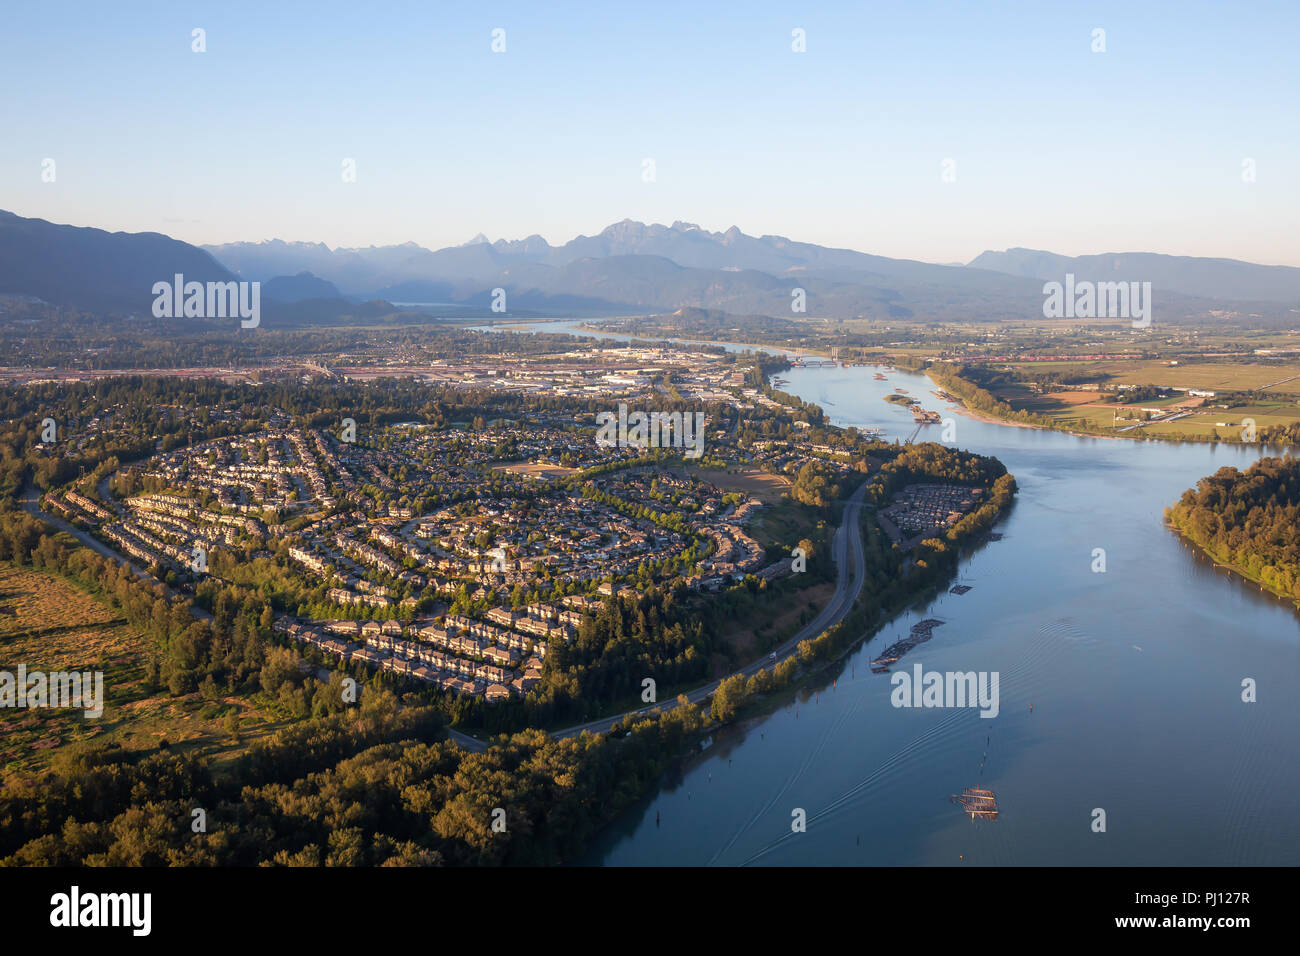 https://c8.alamy.com/comp/PJ127R/aerial-view-of-residential-neighborhood-in-port-coquitlam-during-a-sunny-summer-sunset-taken-in-vancouver-bc-canada-PJ127R.jpg